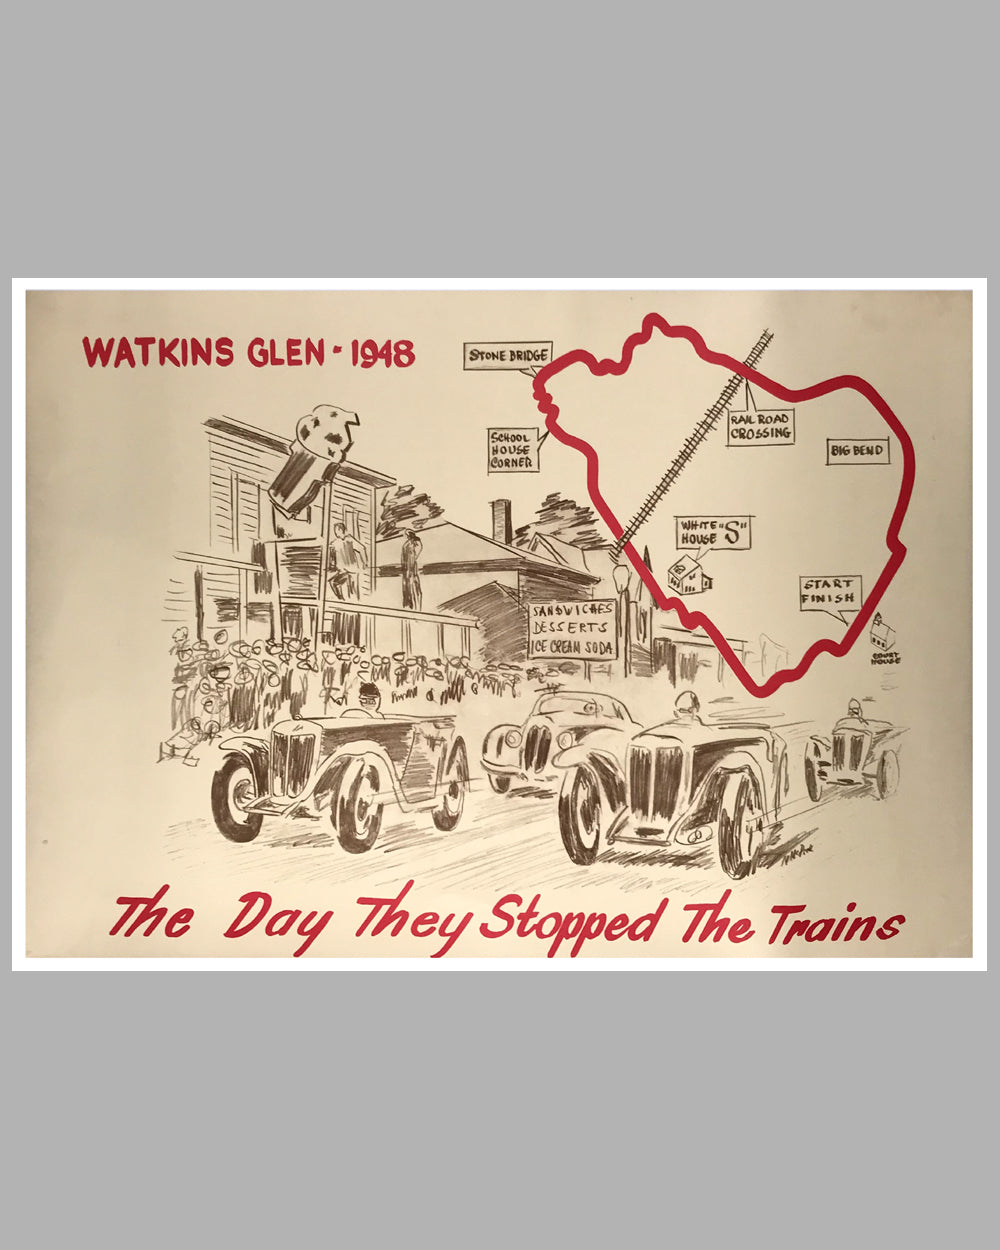 Watkins Glen 1948 "The Day They Stopped The Trains" poster by N. McPeek, 1972